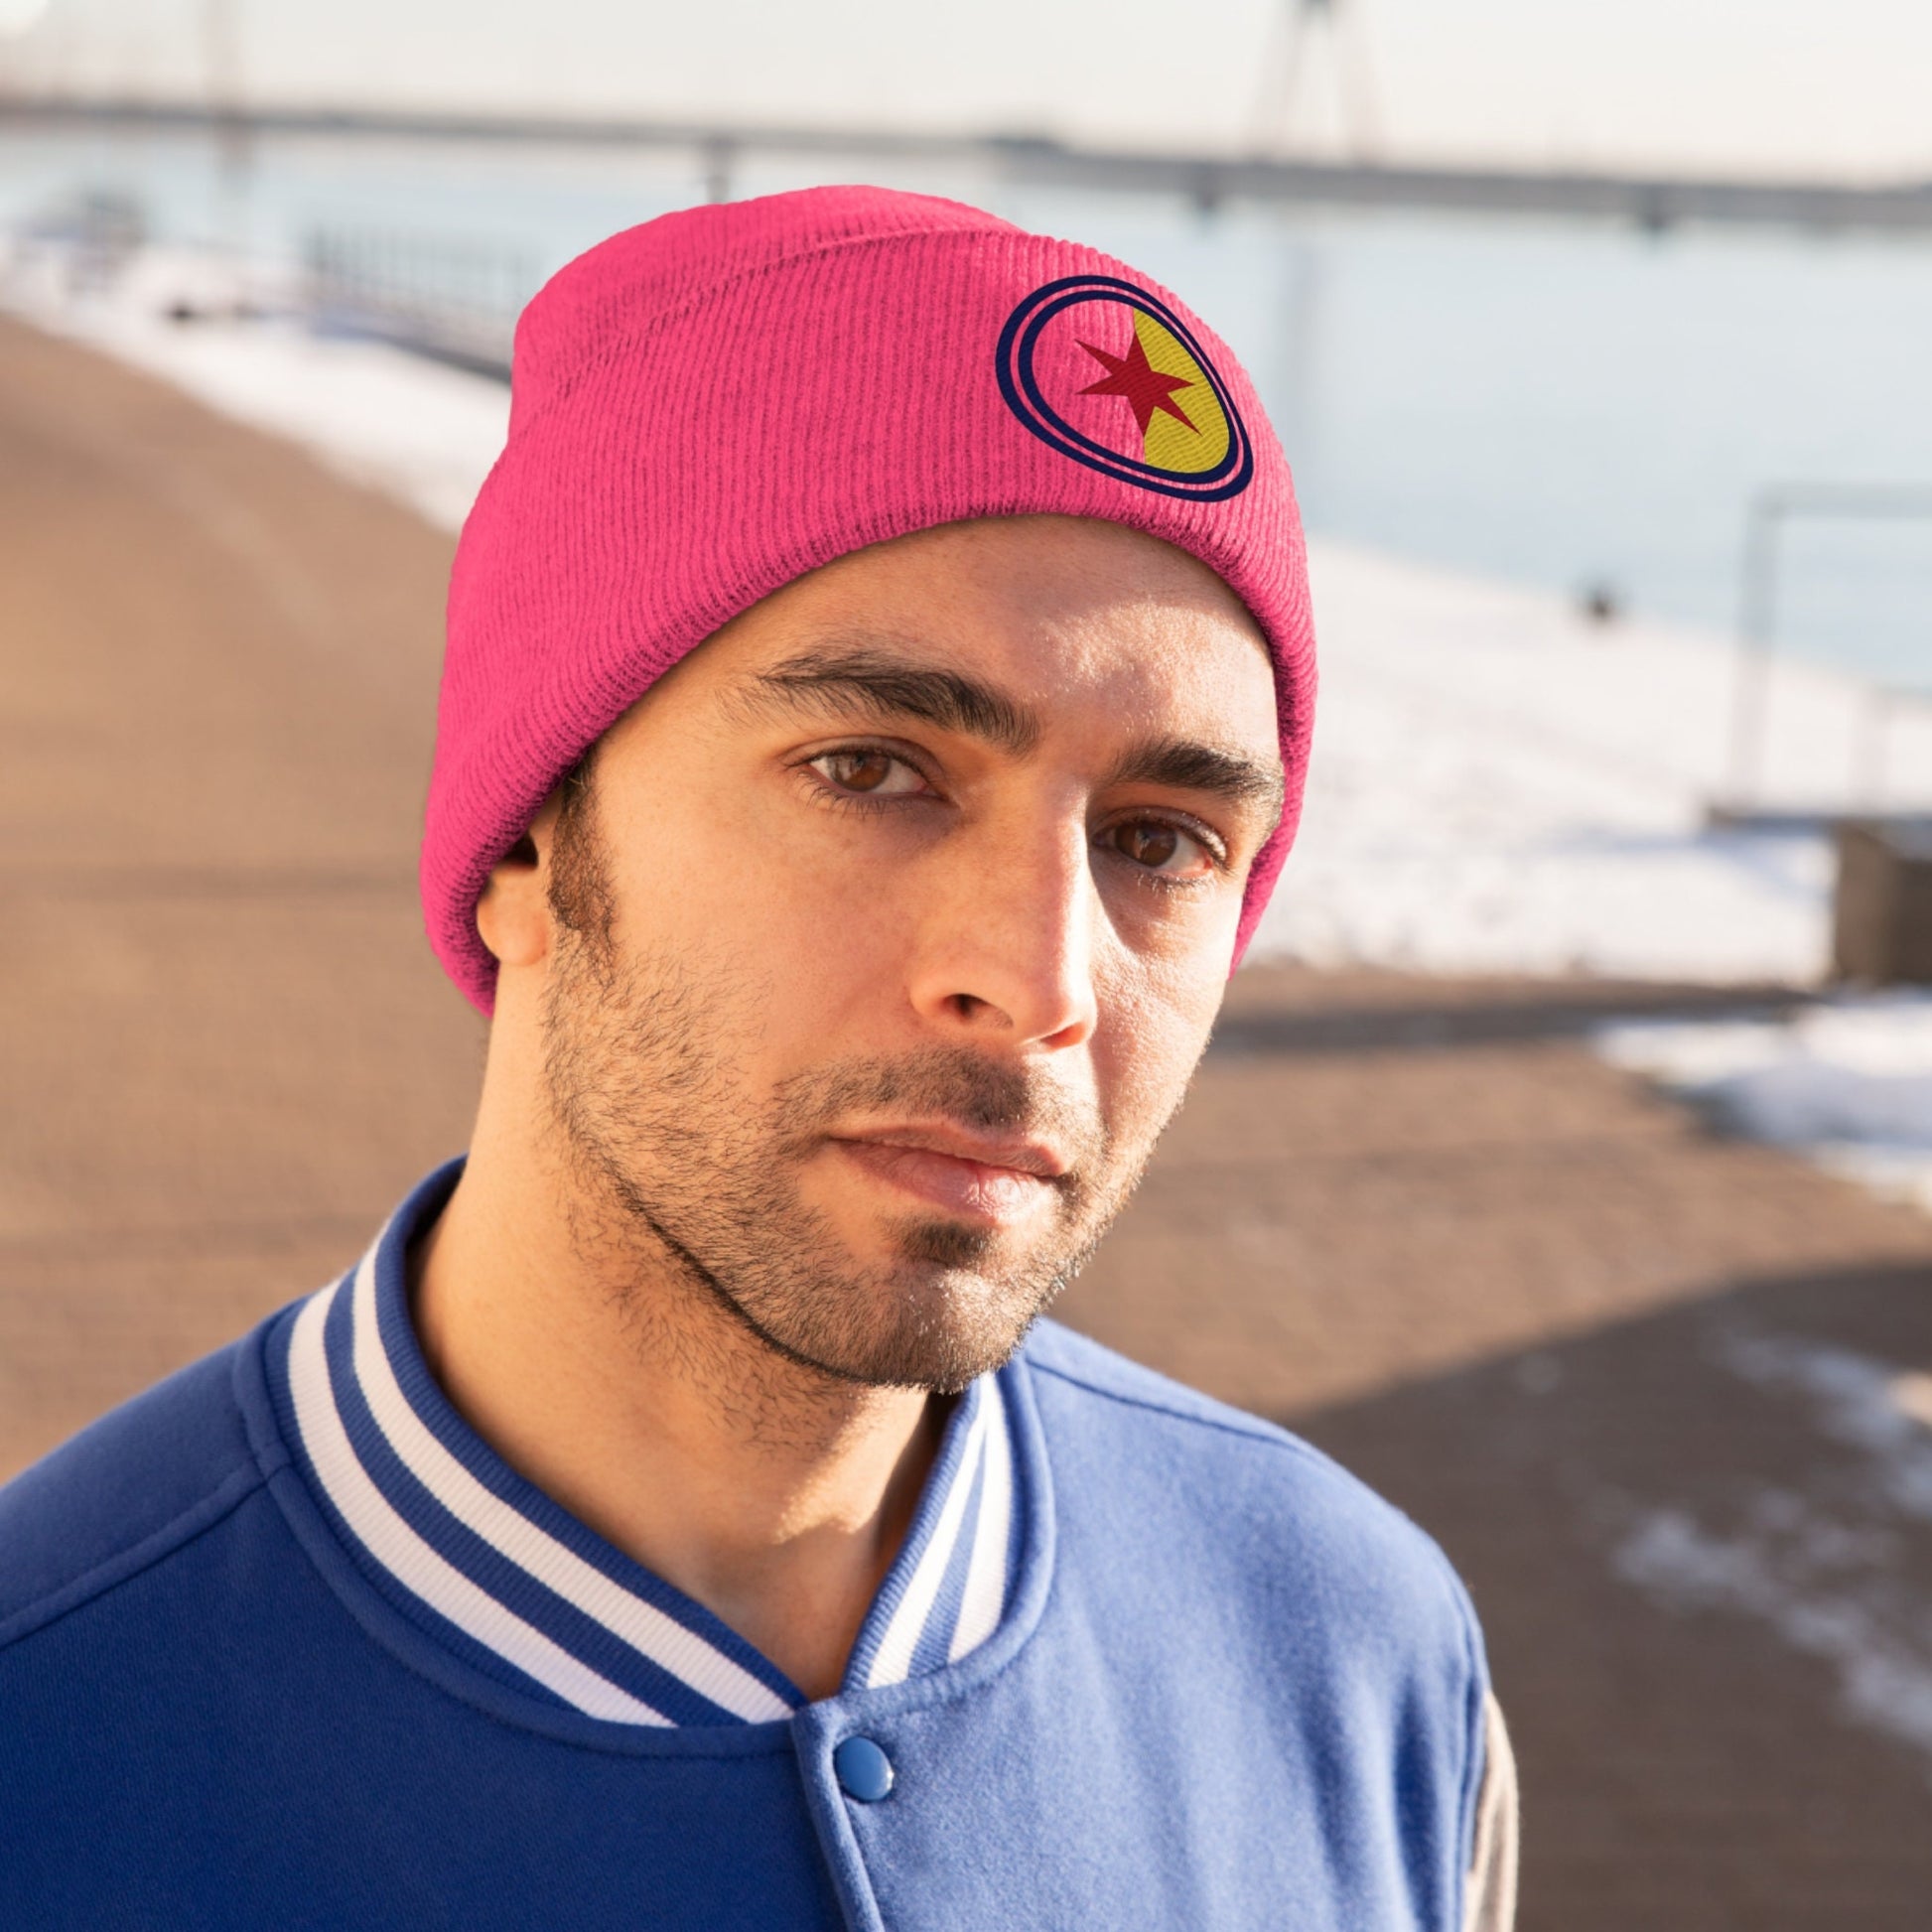 South Bend Indiana city flag Knit Beanie